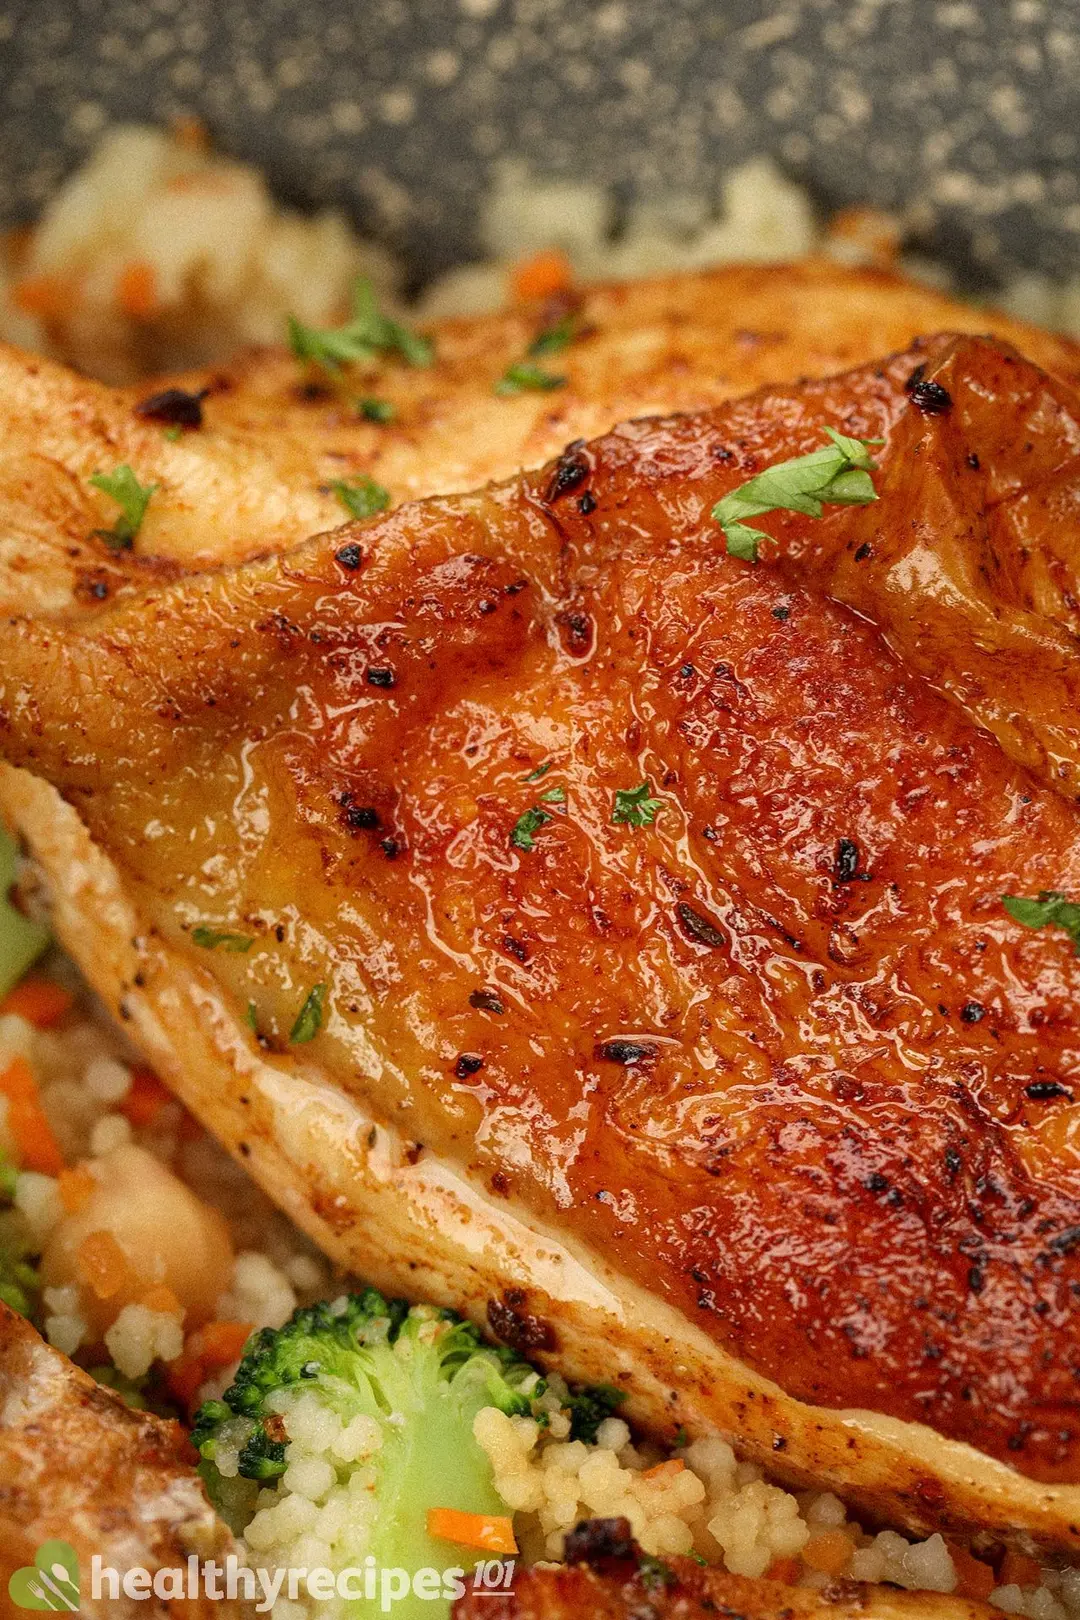 A close-up shot of a cooked chicken thigh whose skin is deliciously browned with a few charred marks, laid on a bed of couscous and near a floret